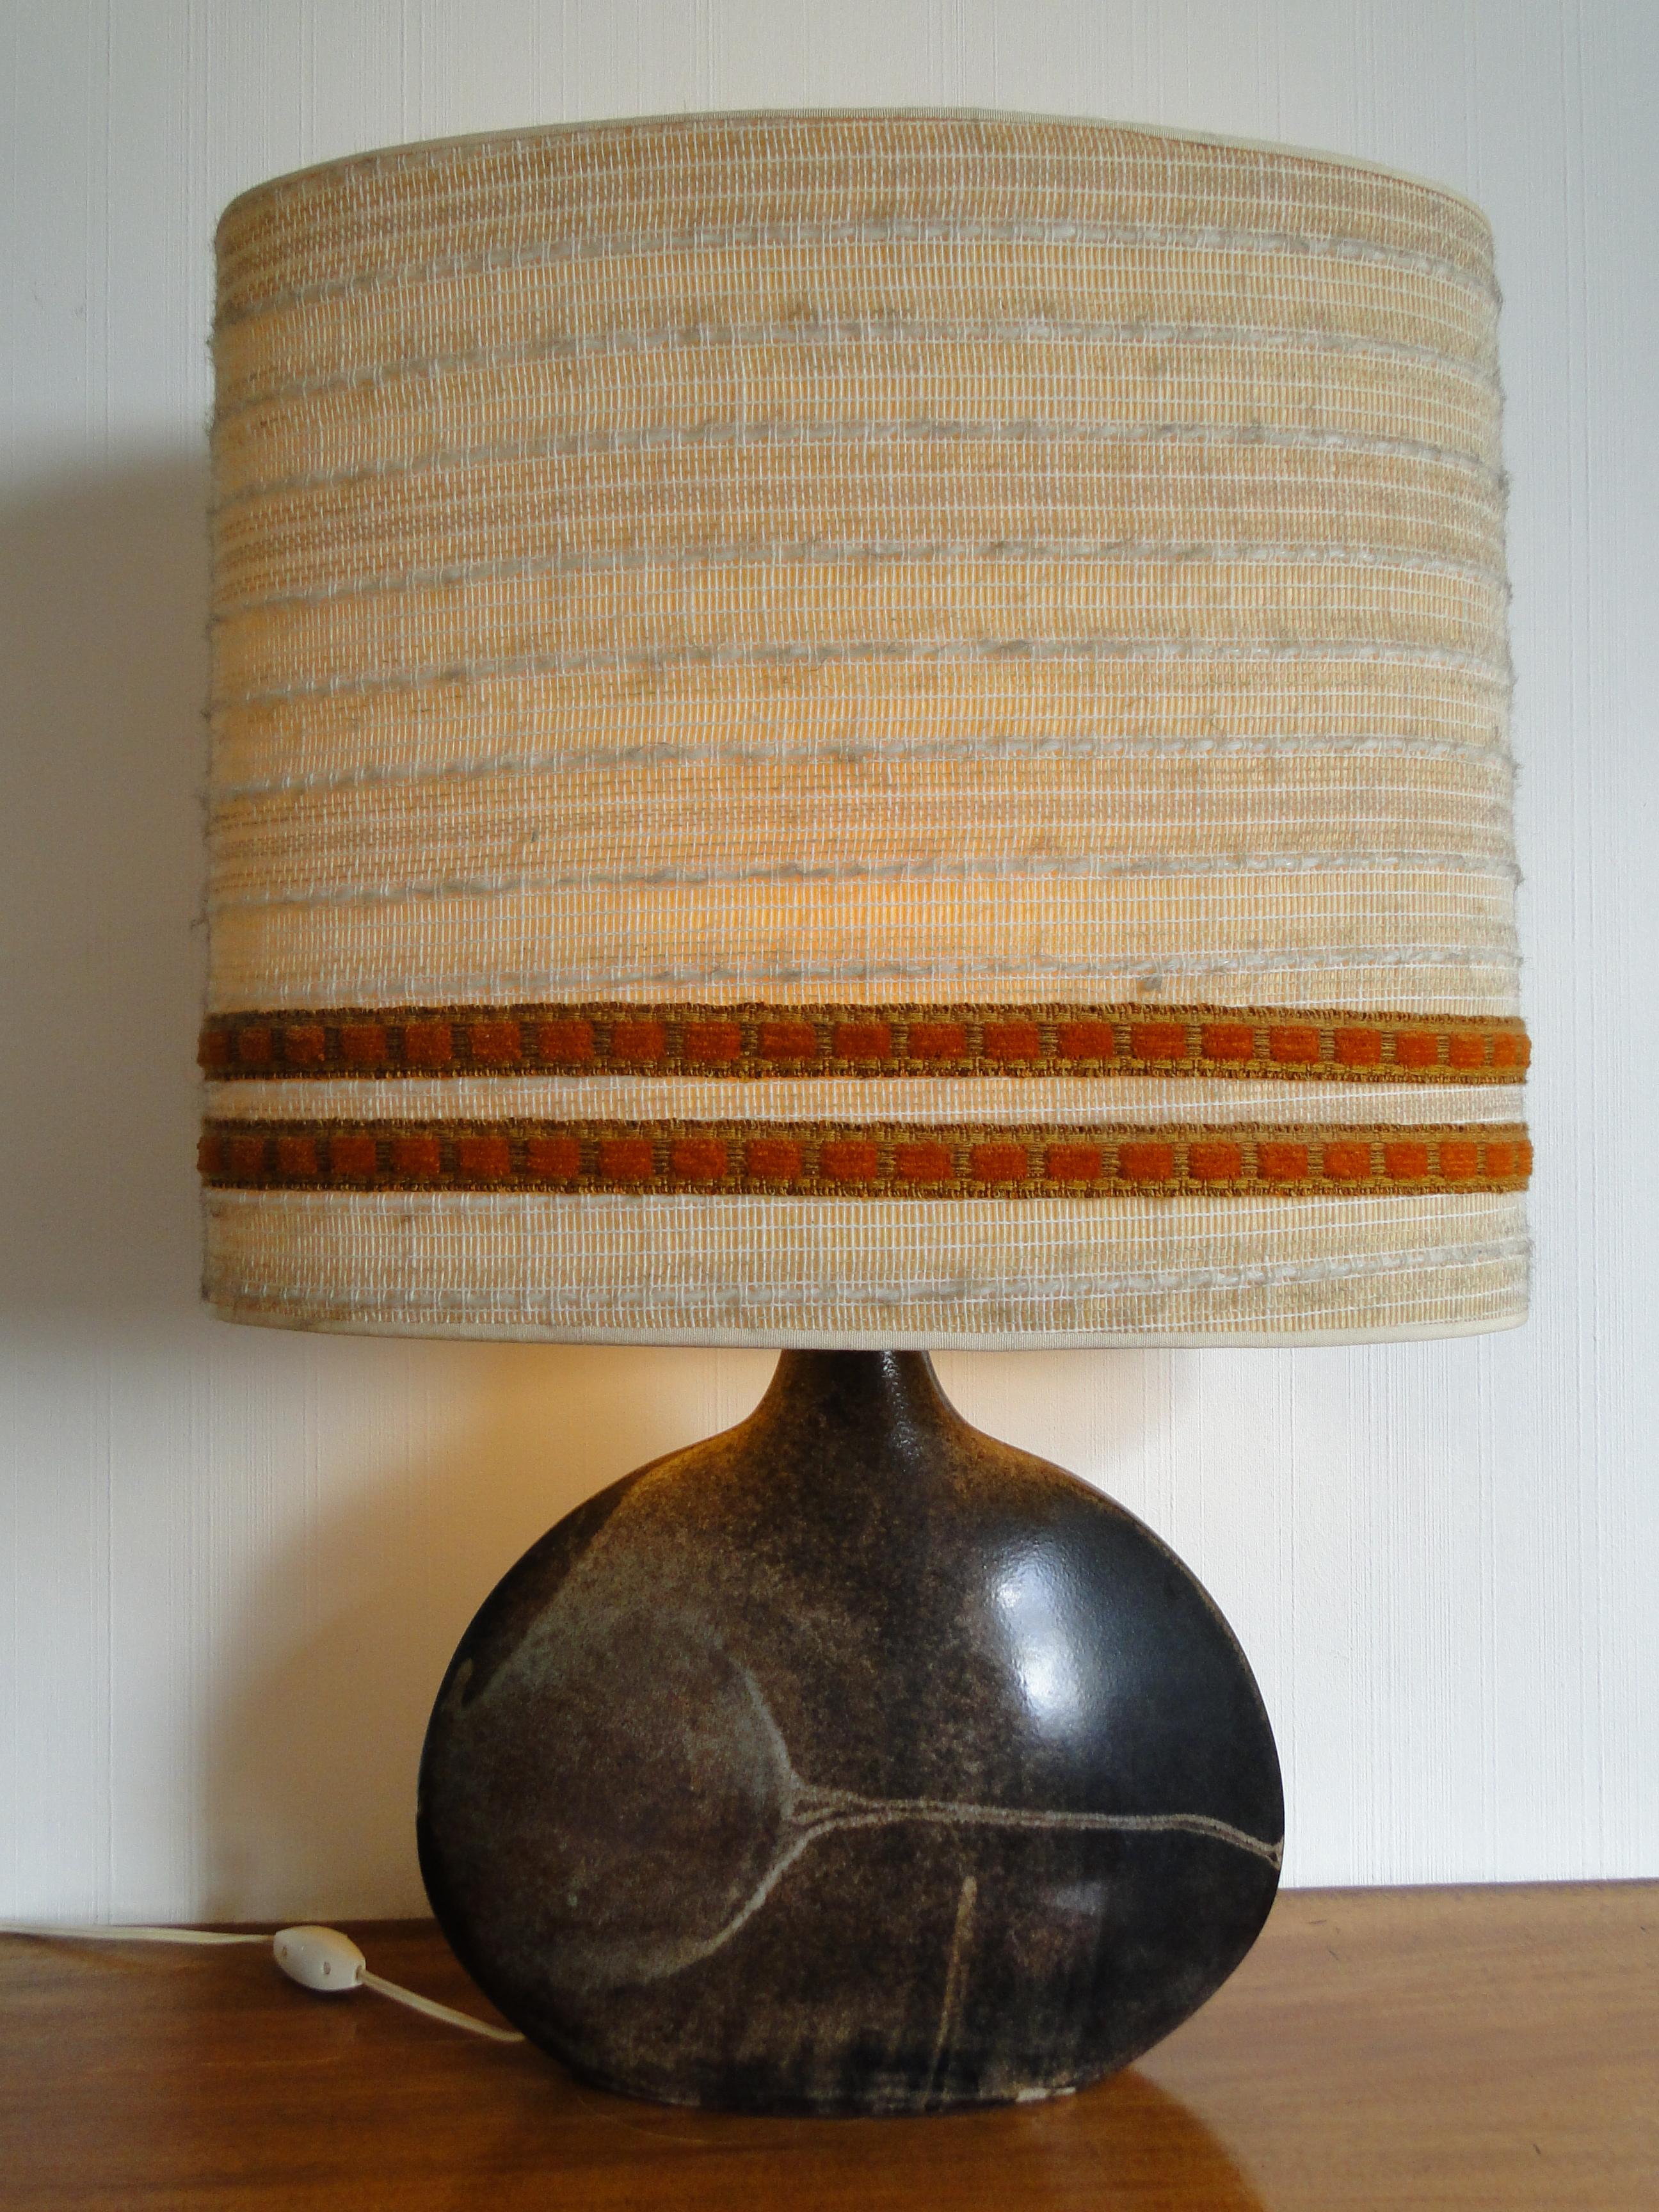 Anne and Pierre Roset Ceramic Table  Lamp Monteyroux France 1950

Beautiful ceramic lamp with its original lampshade and signed under the lamp. 

Height 70 cm  Width 51 cm 

Dimensions of the ceramic:  Height 30 cm Width 36 cm 

The lamp will be